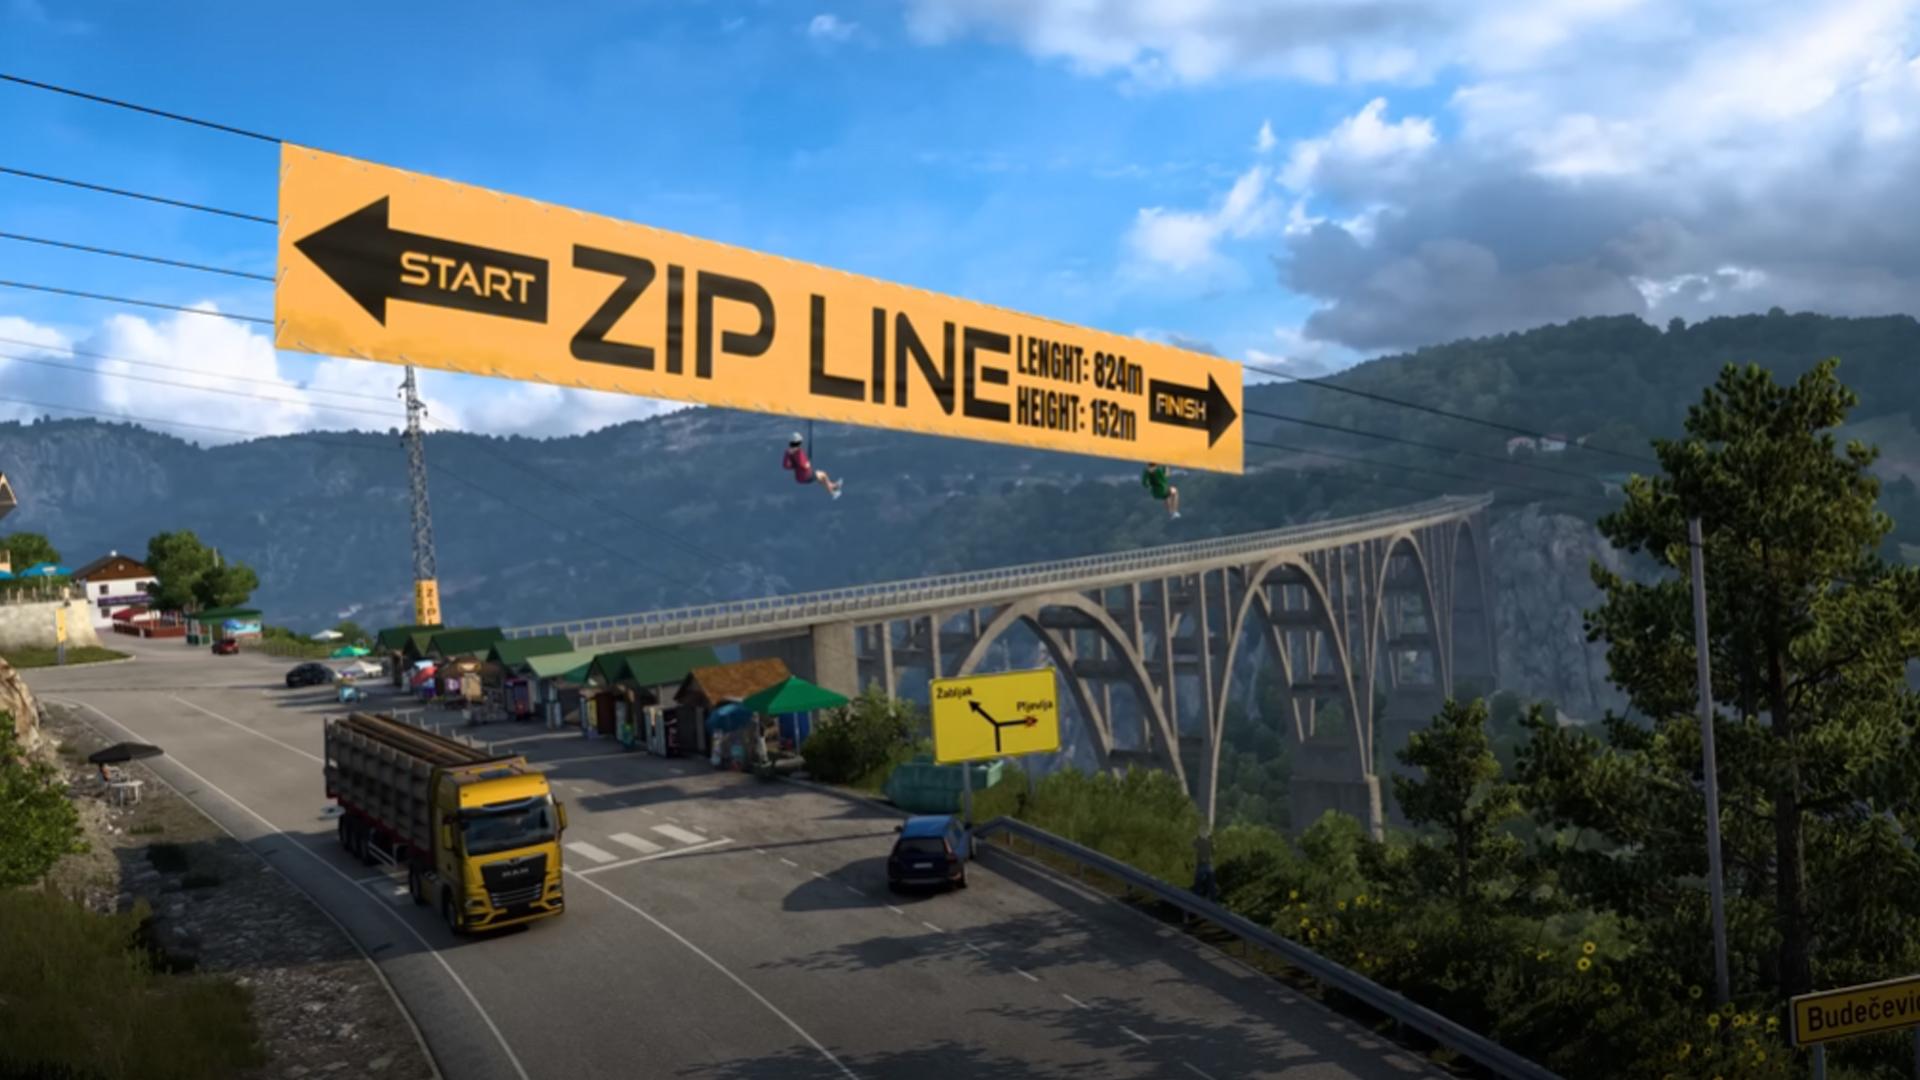 West Balkans DLC now available for Euro Truck Simulator 2